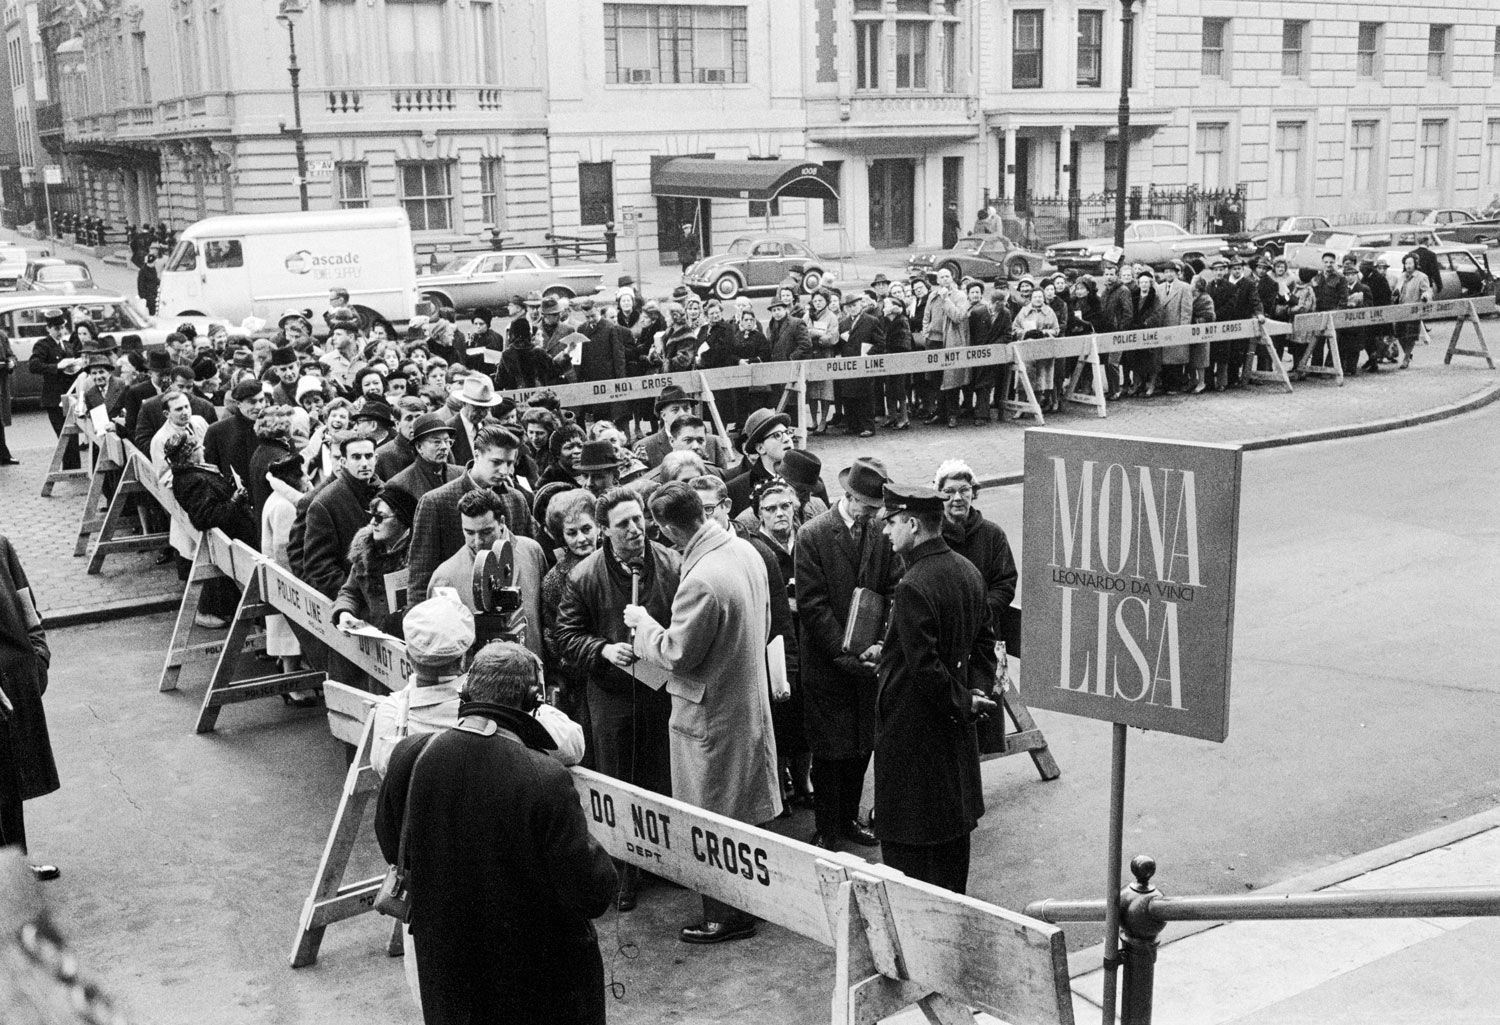  Crowds awaiting the inauguration of the Metropolitan Museum of Art’s Mona Lisa exhibition in New York in February 1963.   Photo: Bettman/Getty Images.